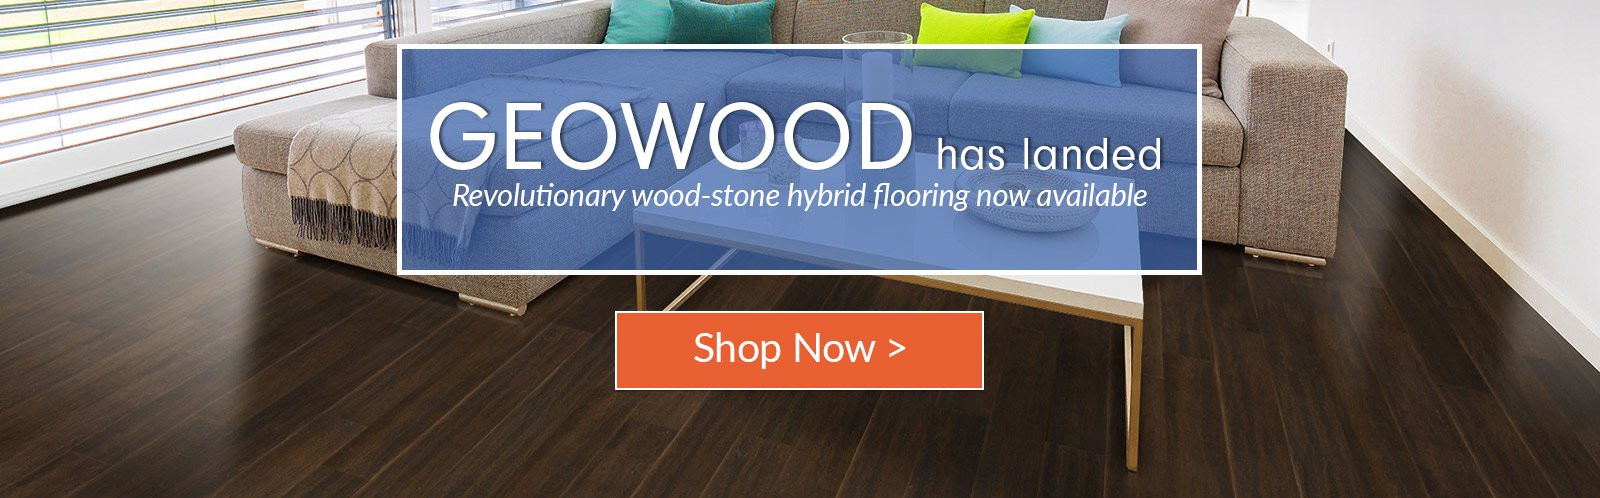 23 Elegant Palm Acacia Hardwood Flooring 2024 free download palm acacia hardwood flooring of green building construction materials and home decor cali bamboo throughout geowood launch homepage slider